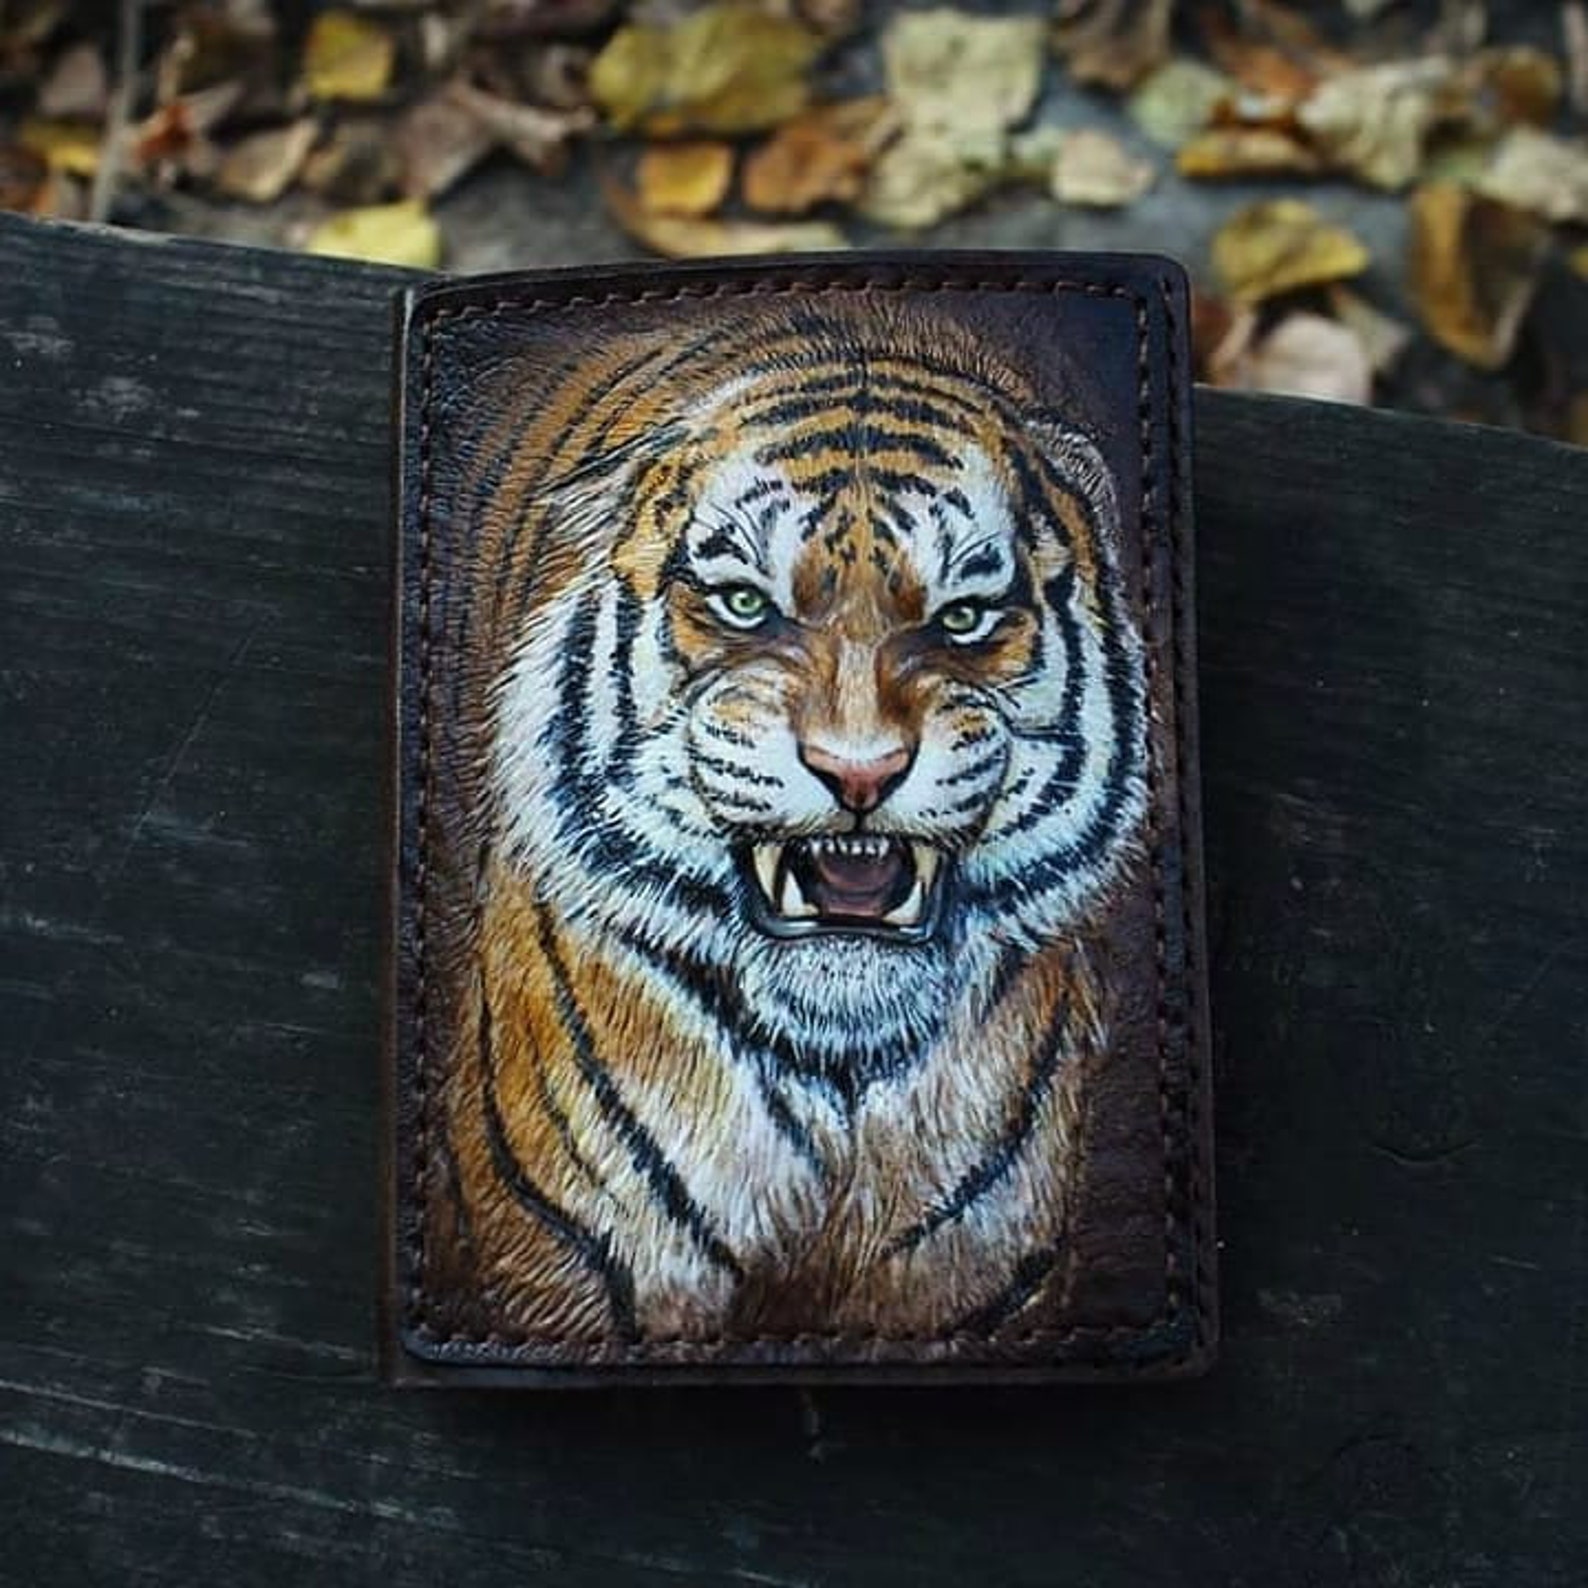 Leather wallet Tiger wallet Hand-tooled leather wallet | Etsy